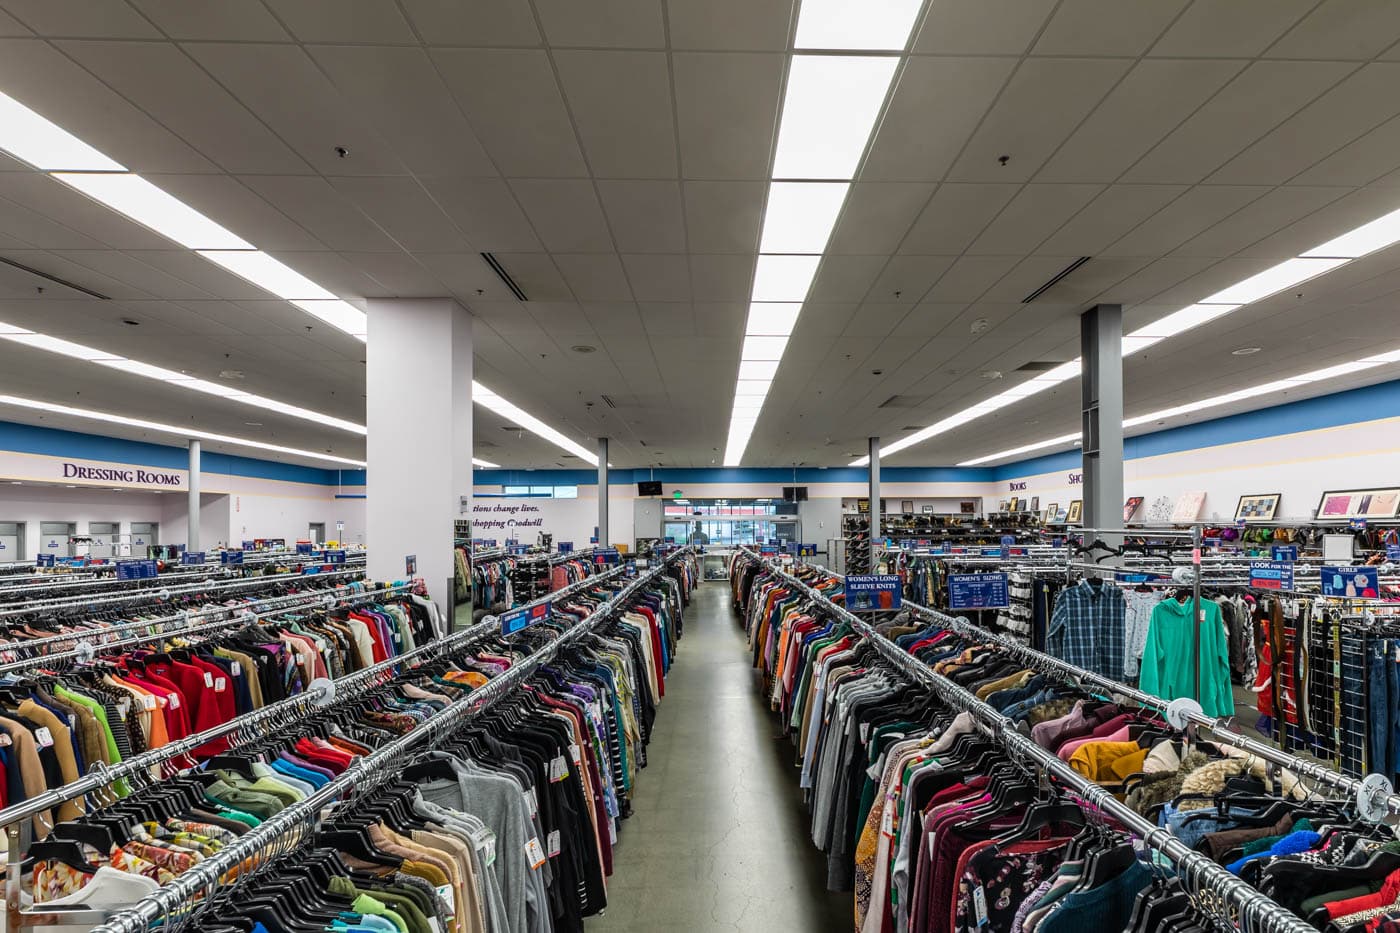 Goodwill clothes section